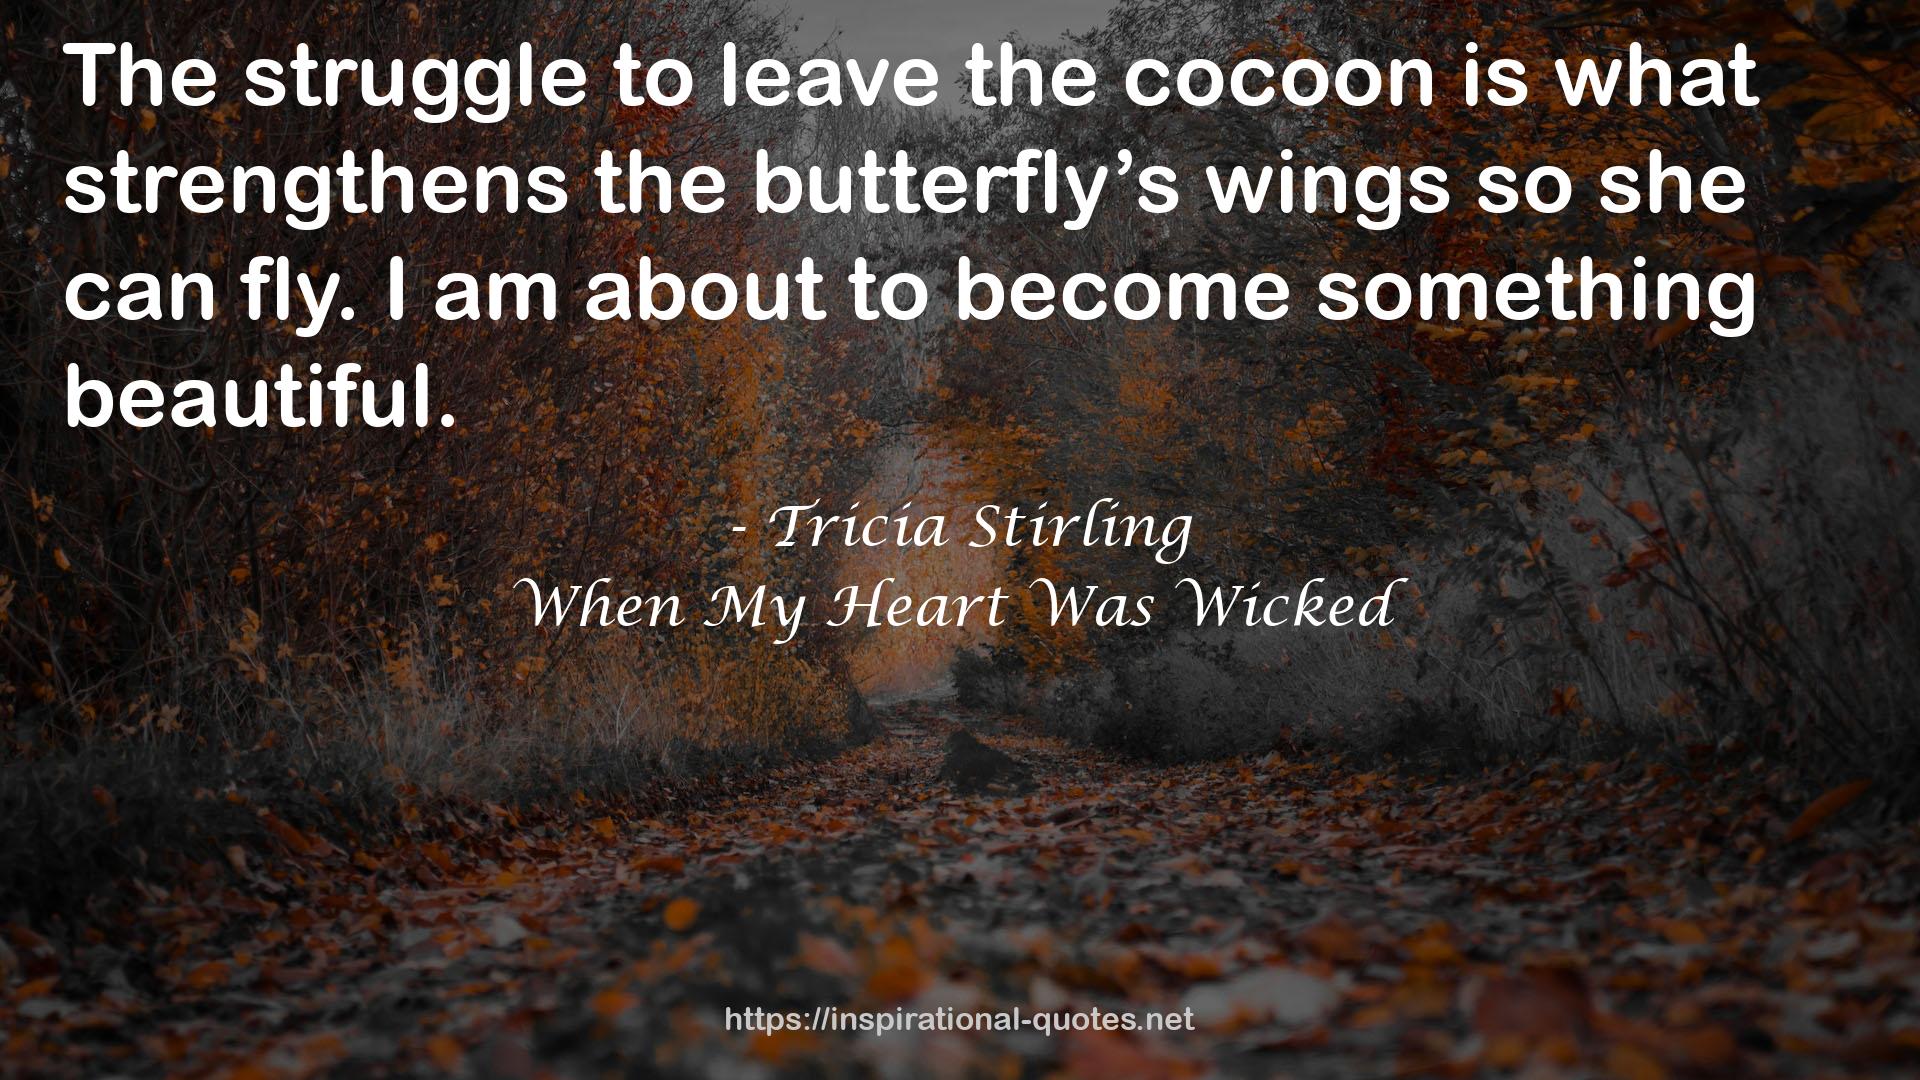 Tricia Stirling QUOTES